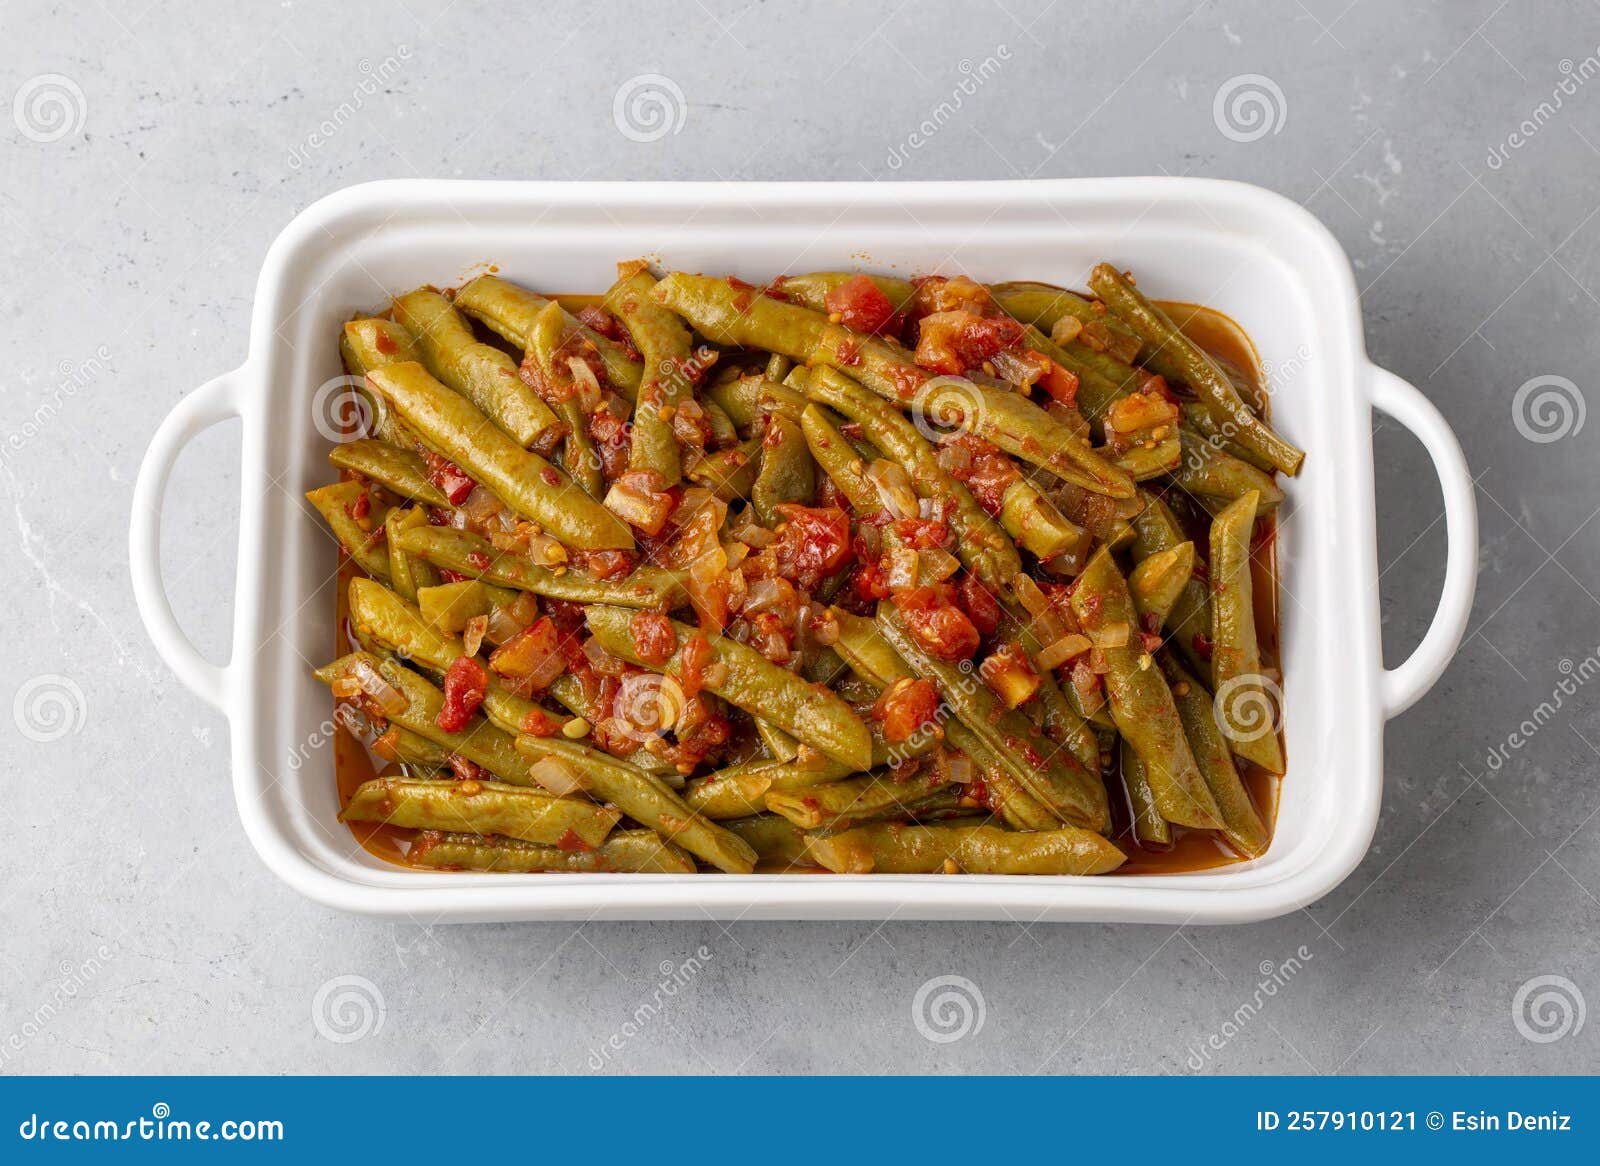 traditional delicious turkish food green beans with olive oil turkish name zeytinyagli taze fasulye